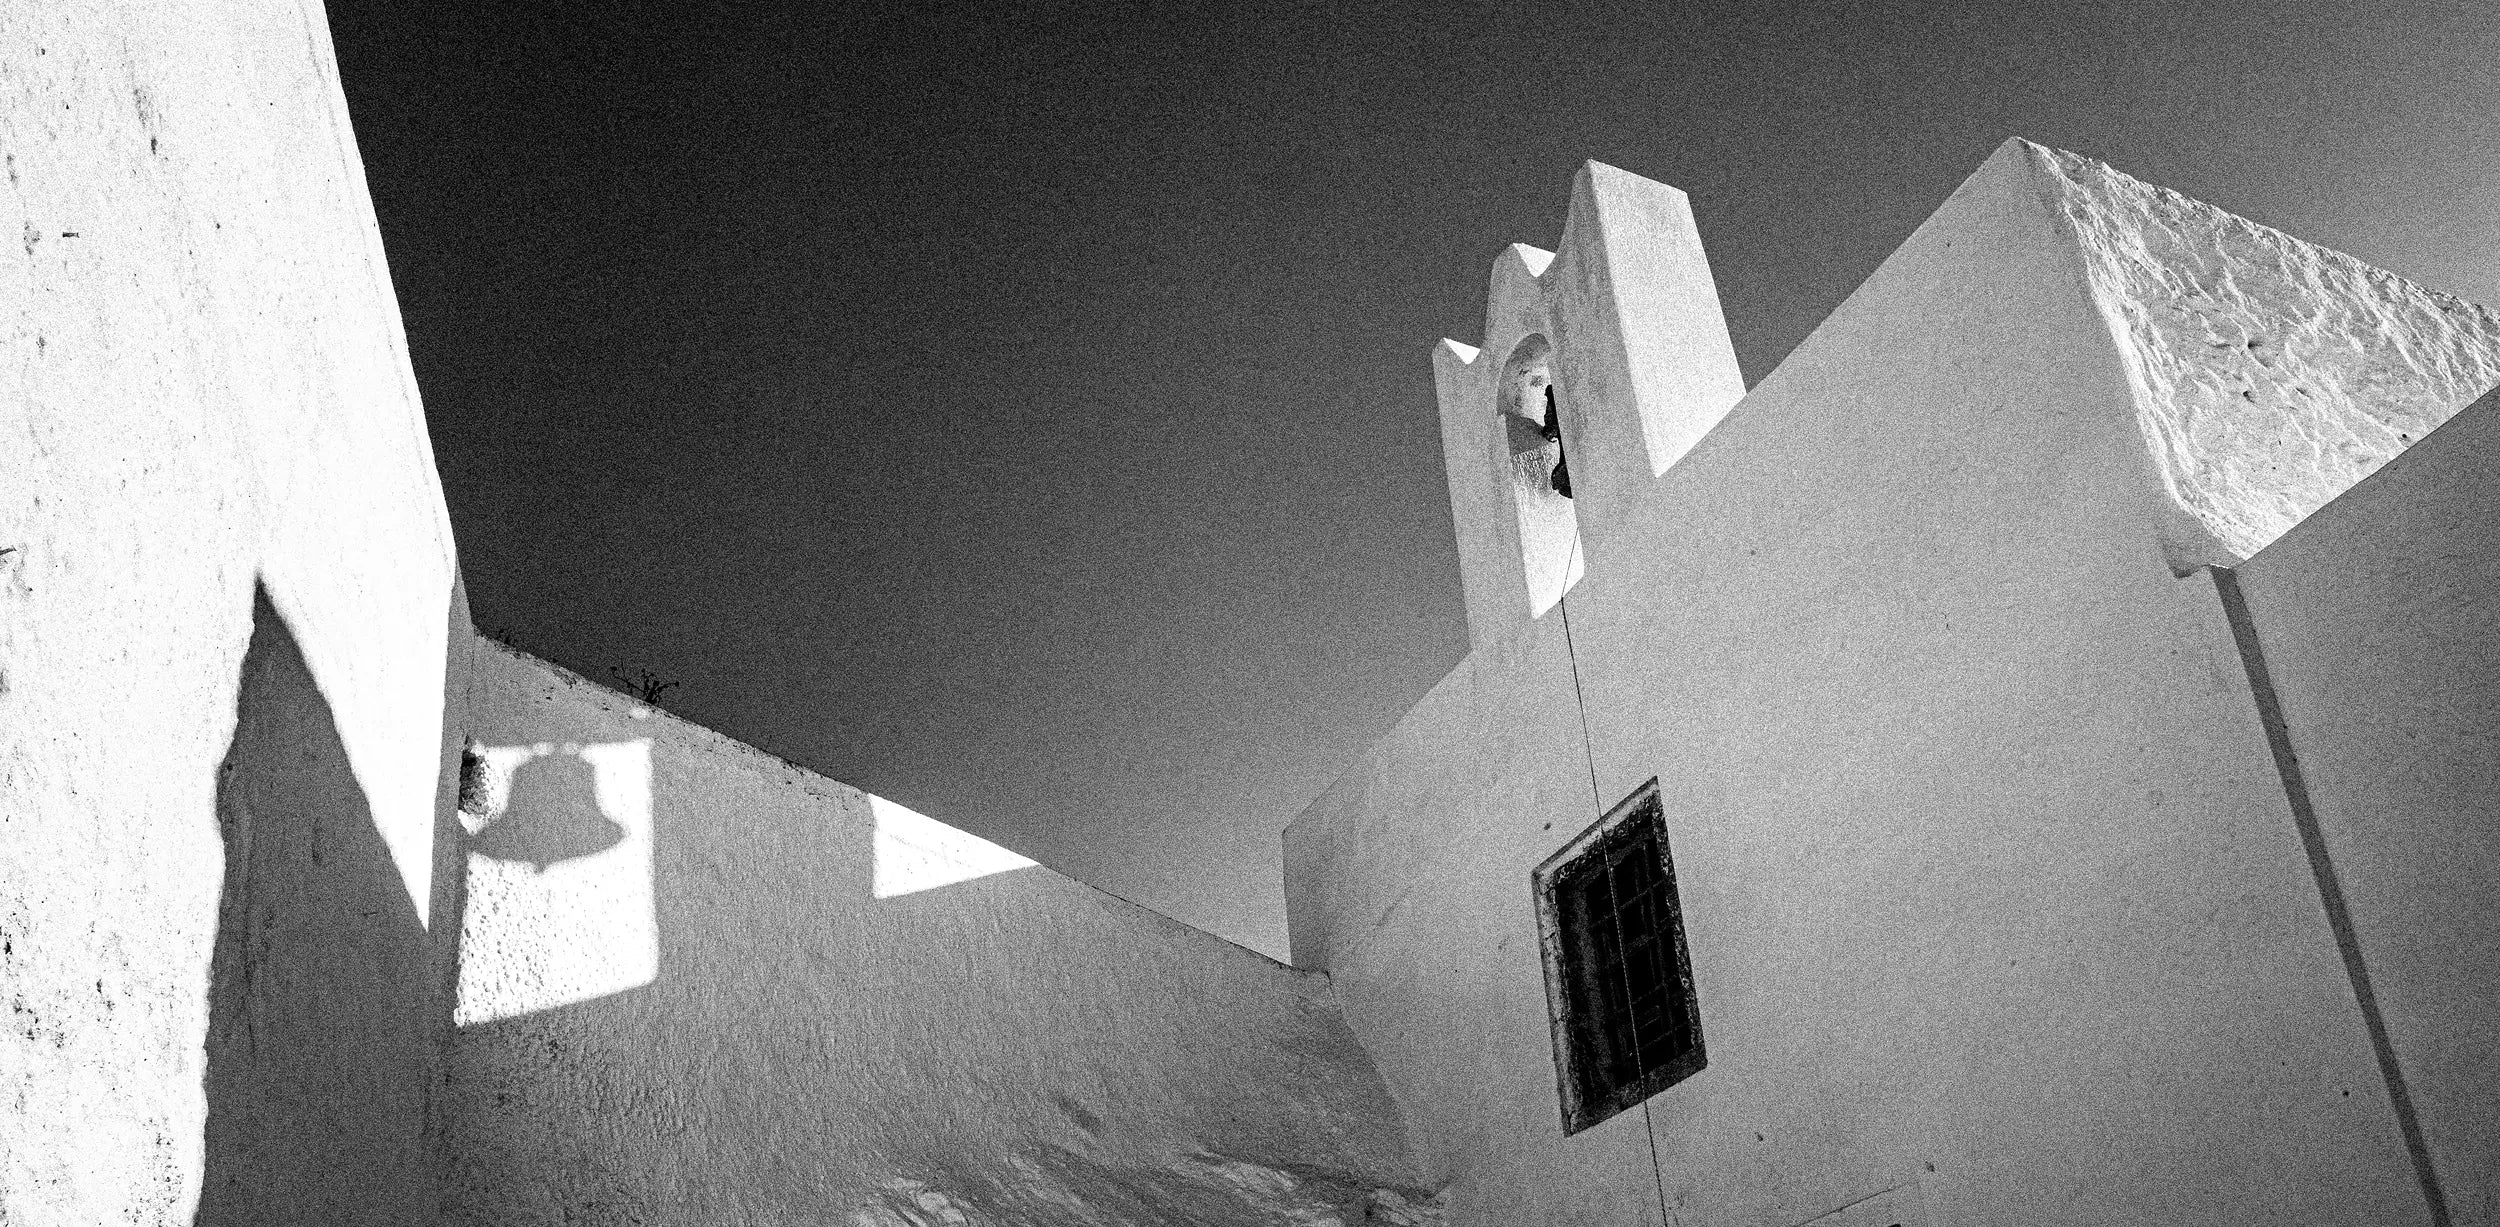 Scene on Santorini, Greece - Chorōs black and white photography project by George Tatakis